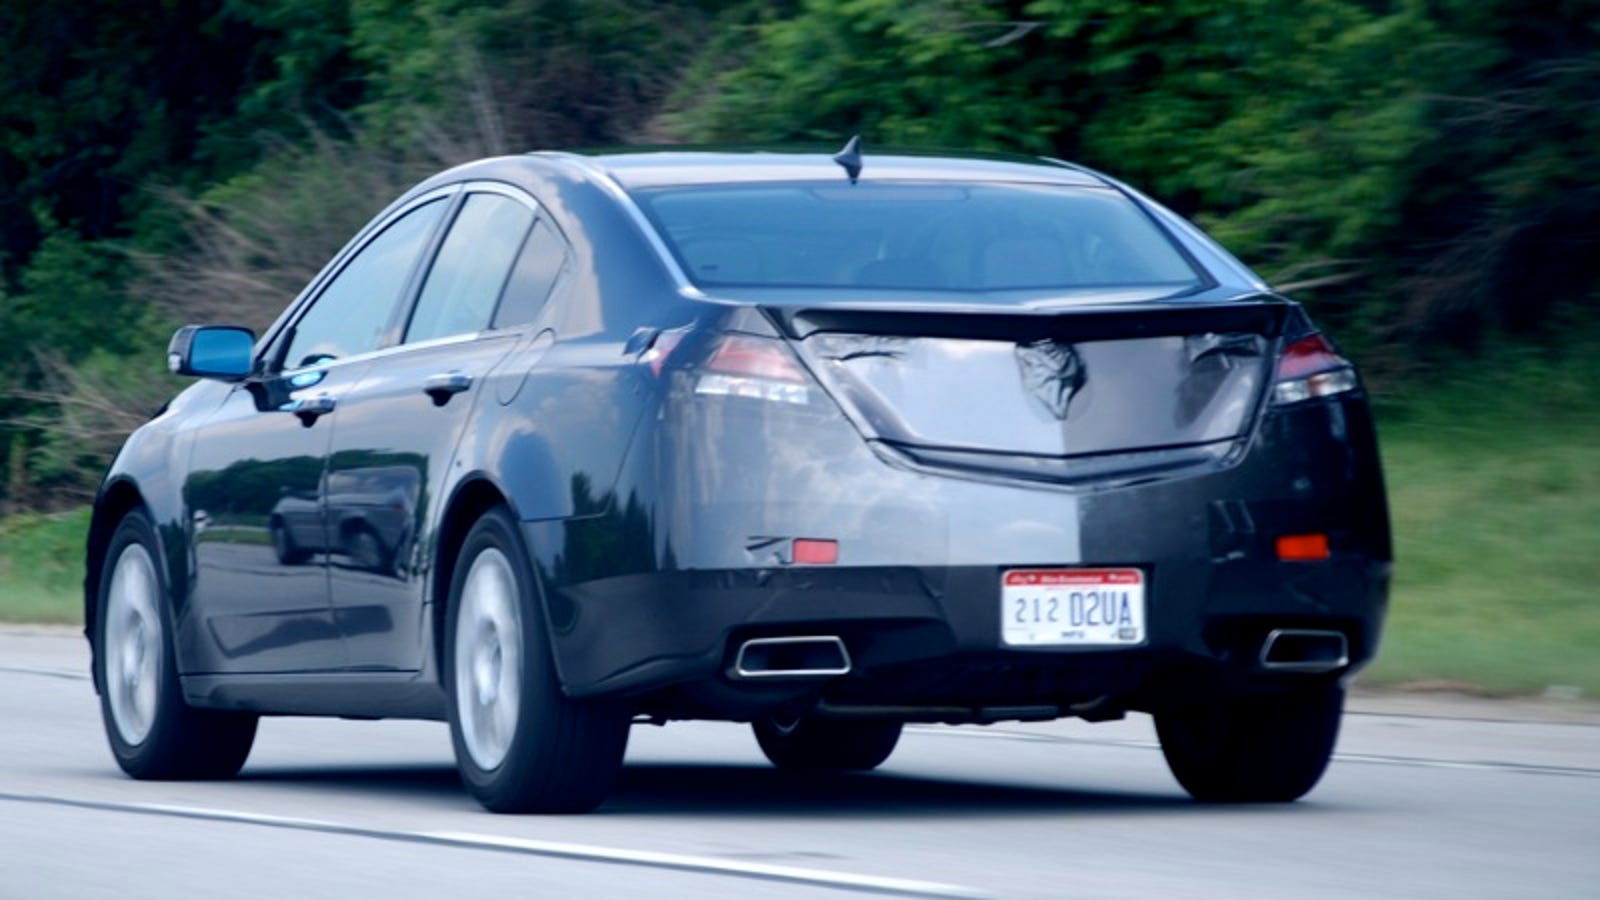 2009 Acura TL Shows Us Its Rear End Yet Again